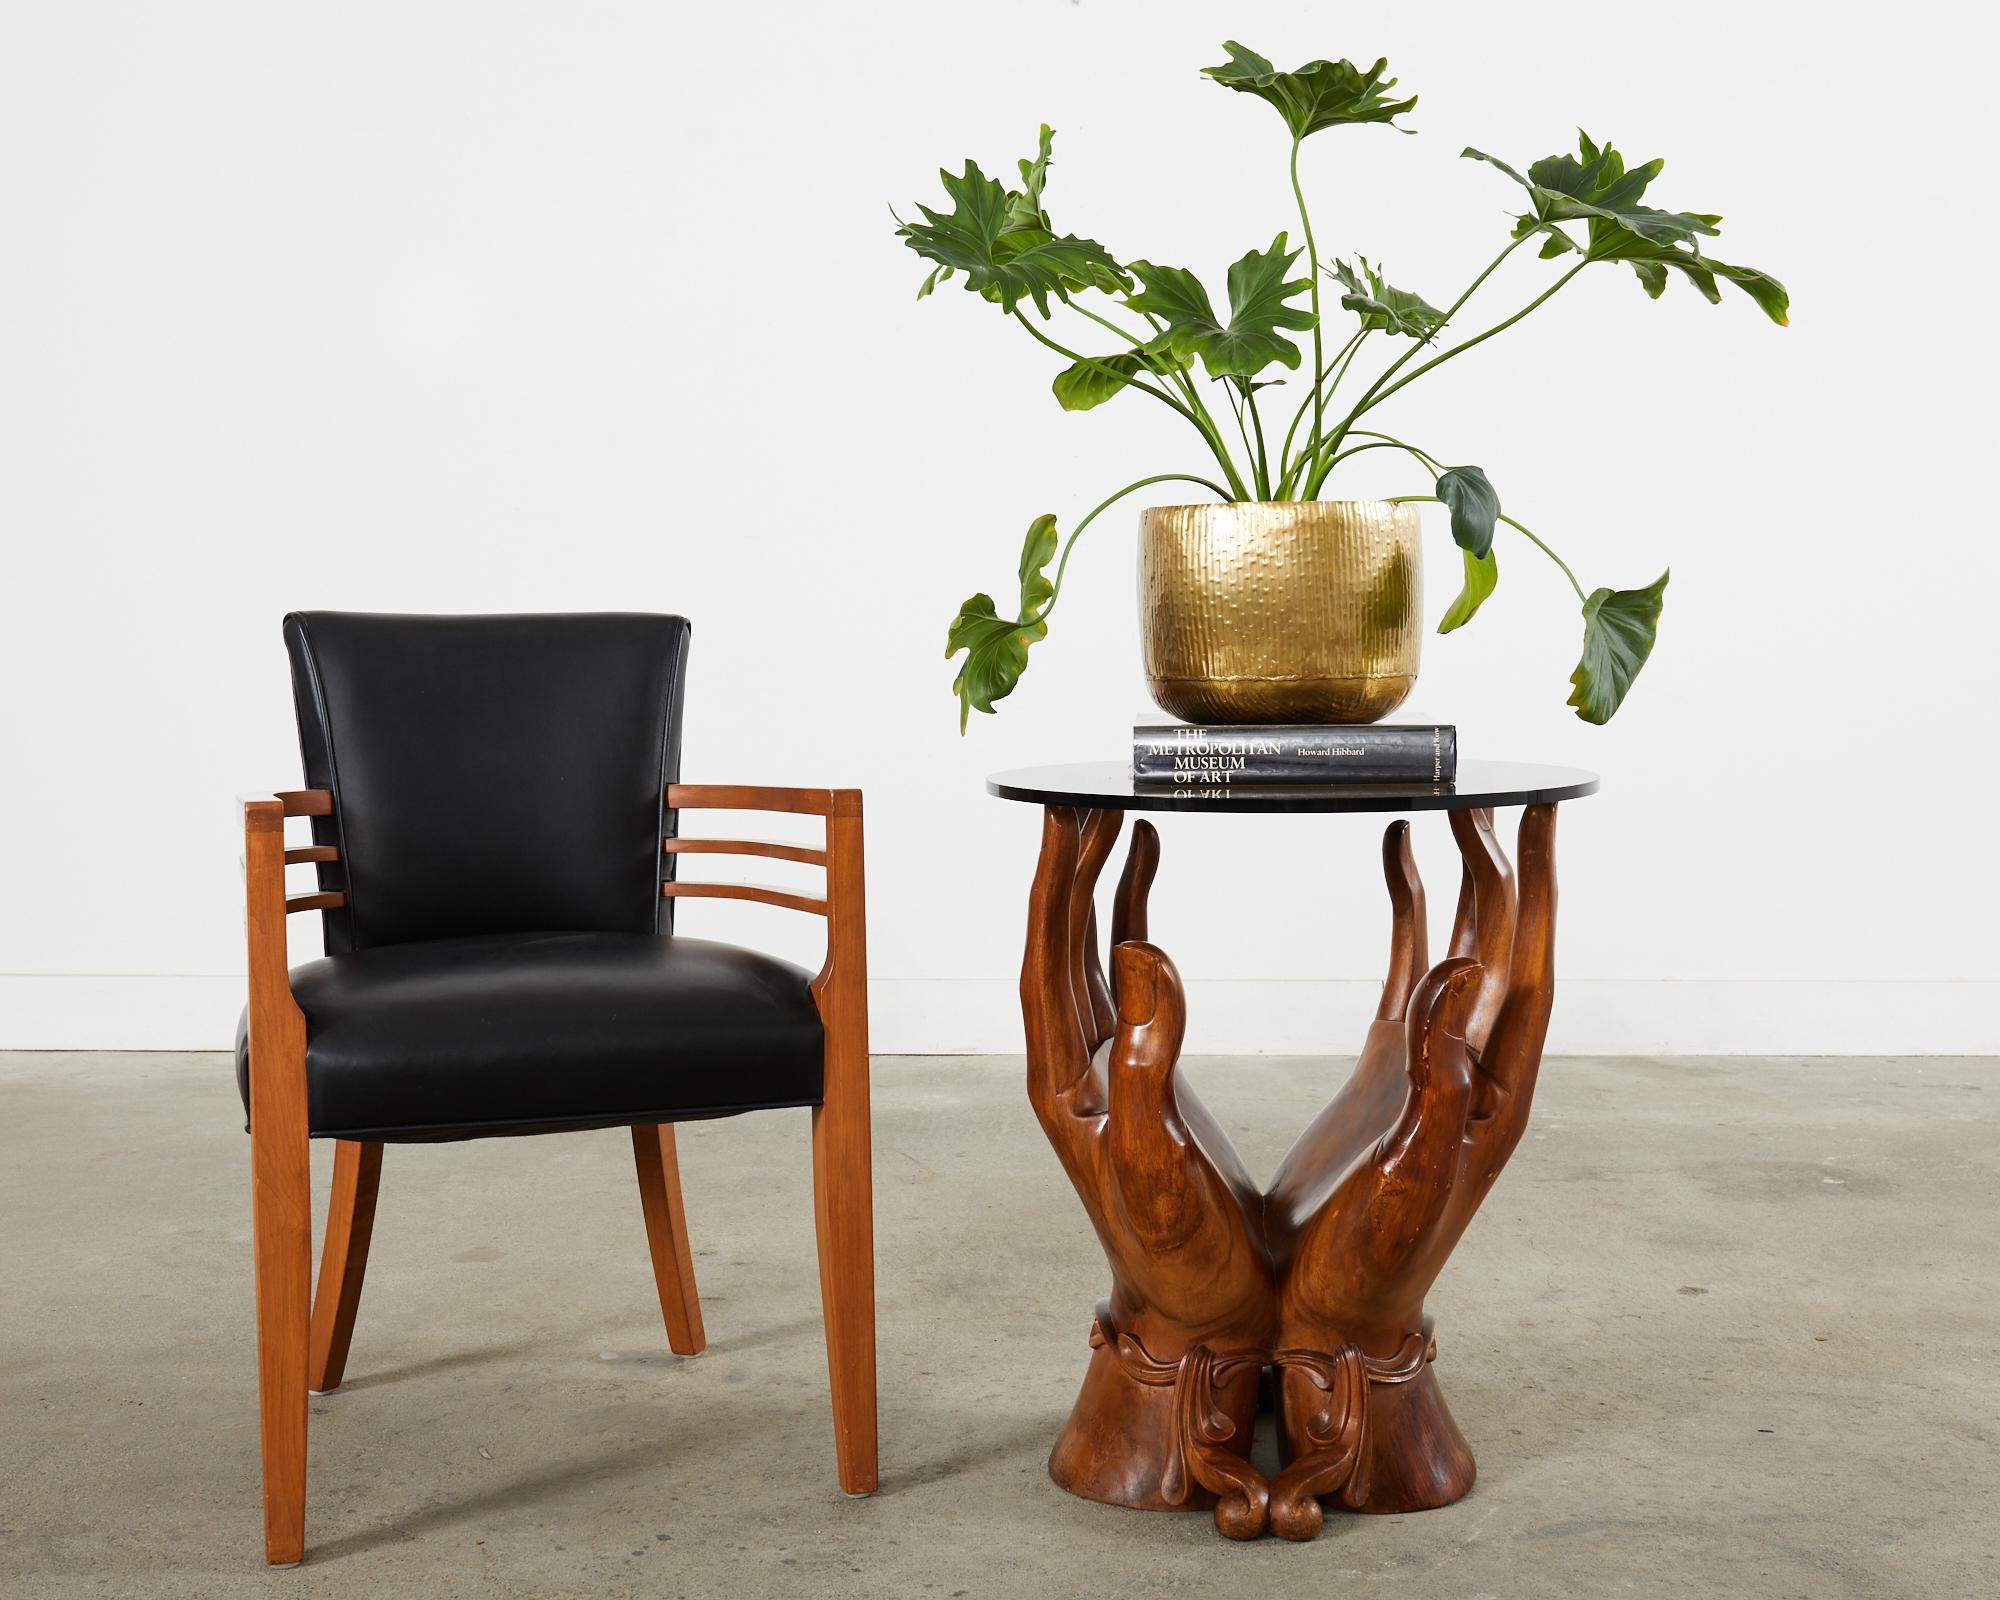 Extraordinary carved walnut drinks table or side table featuring two graceul hands made in the style and manner of Pedro Freideberg. The mid-century modern sculptural carving depicts two hands conjoined at the wrist with decorative swag wrapped